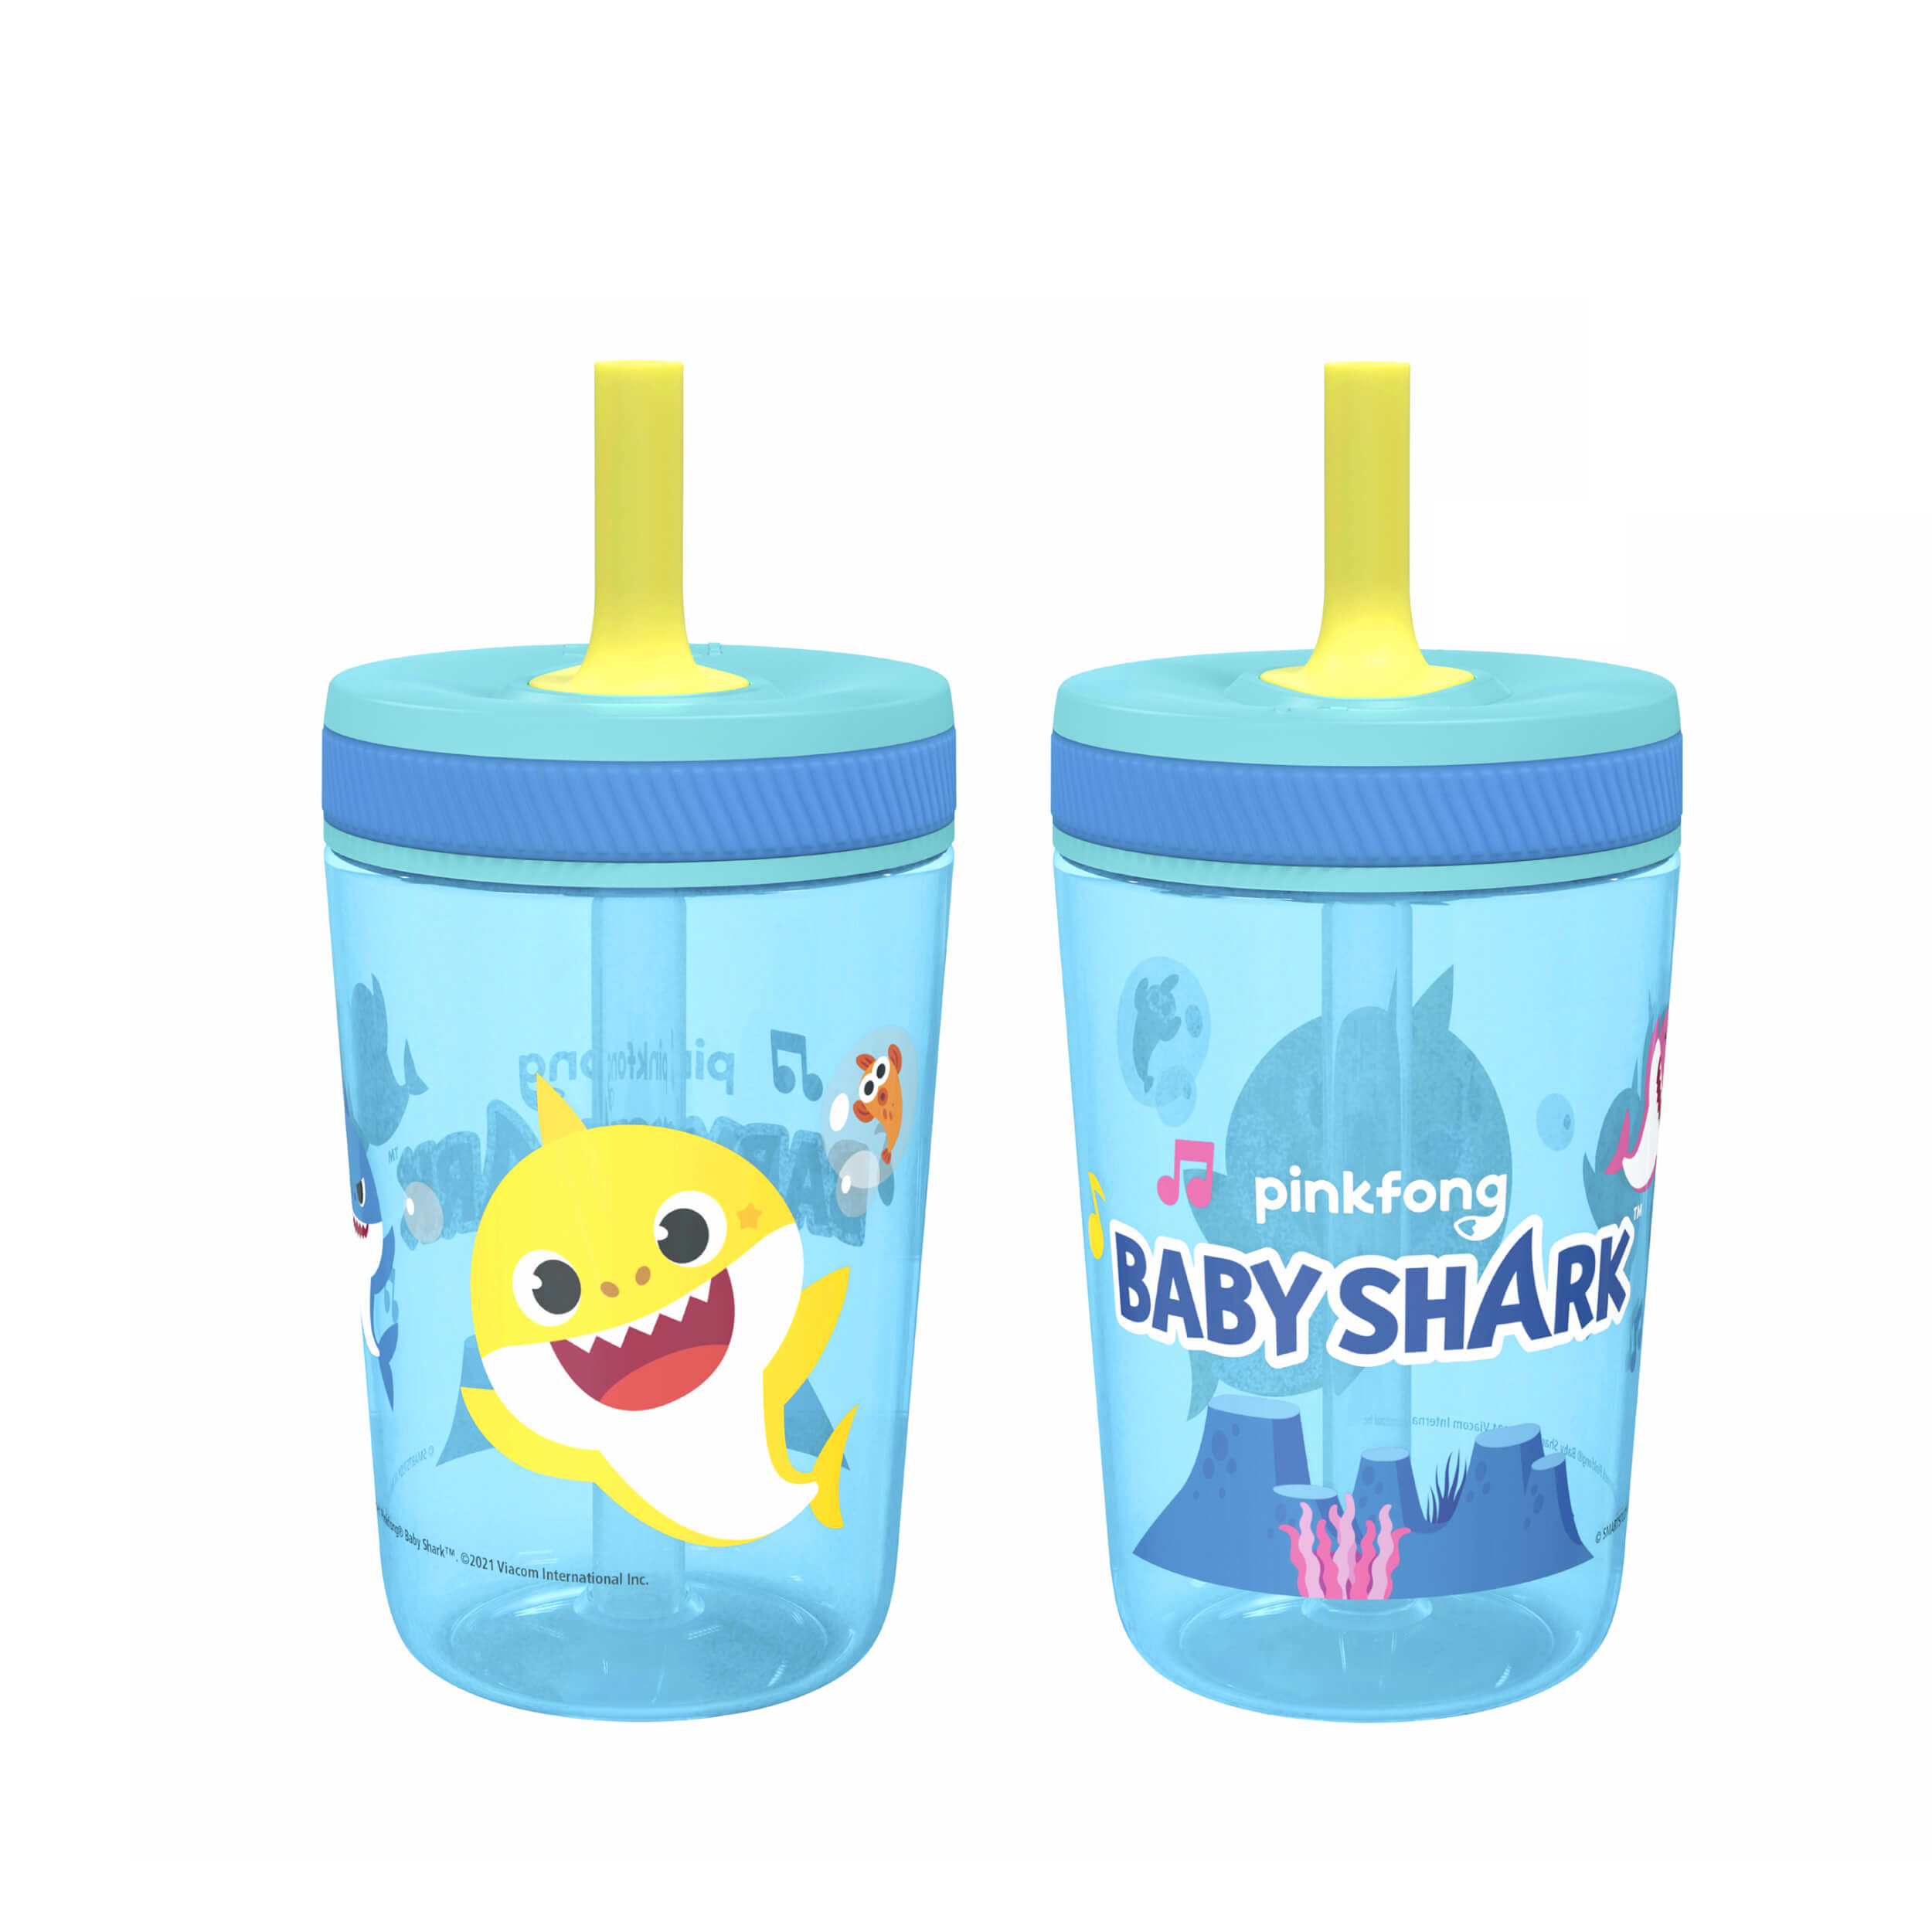 Zak! Designs Zak Designs Shells Kelso Tumbler Set, Leak-Proof Screw-On Lid  with Straw, Bundle for Kids Includes Plastic and Stainless Steel C